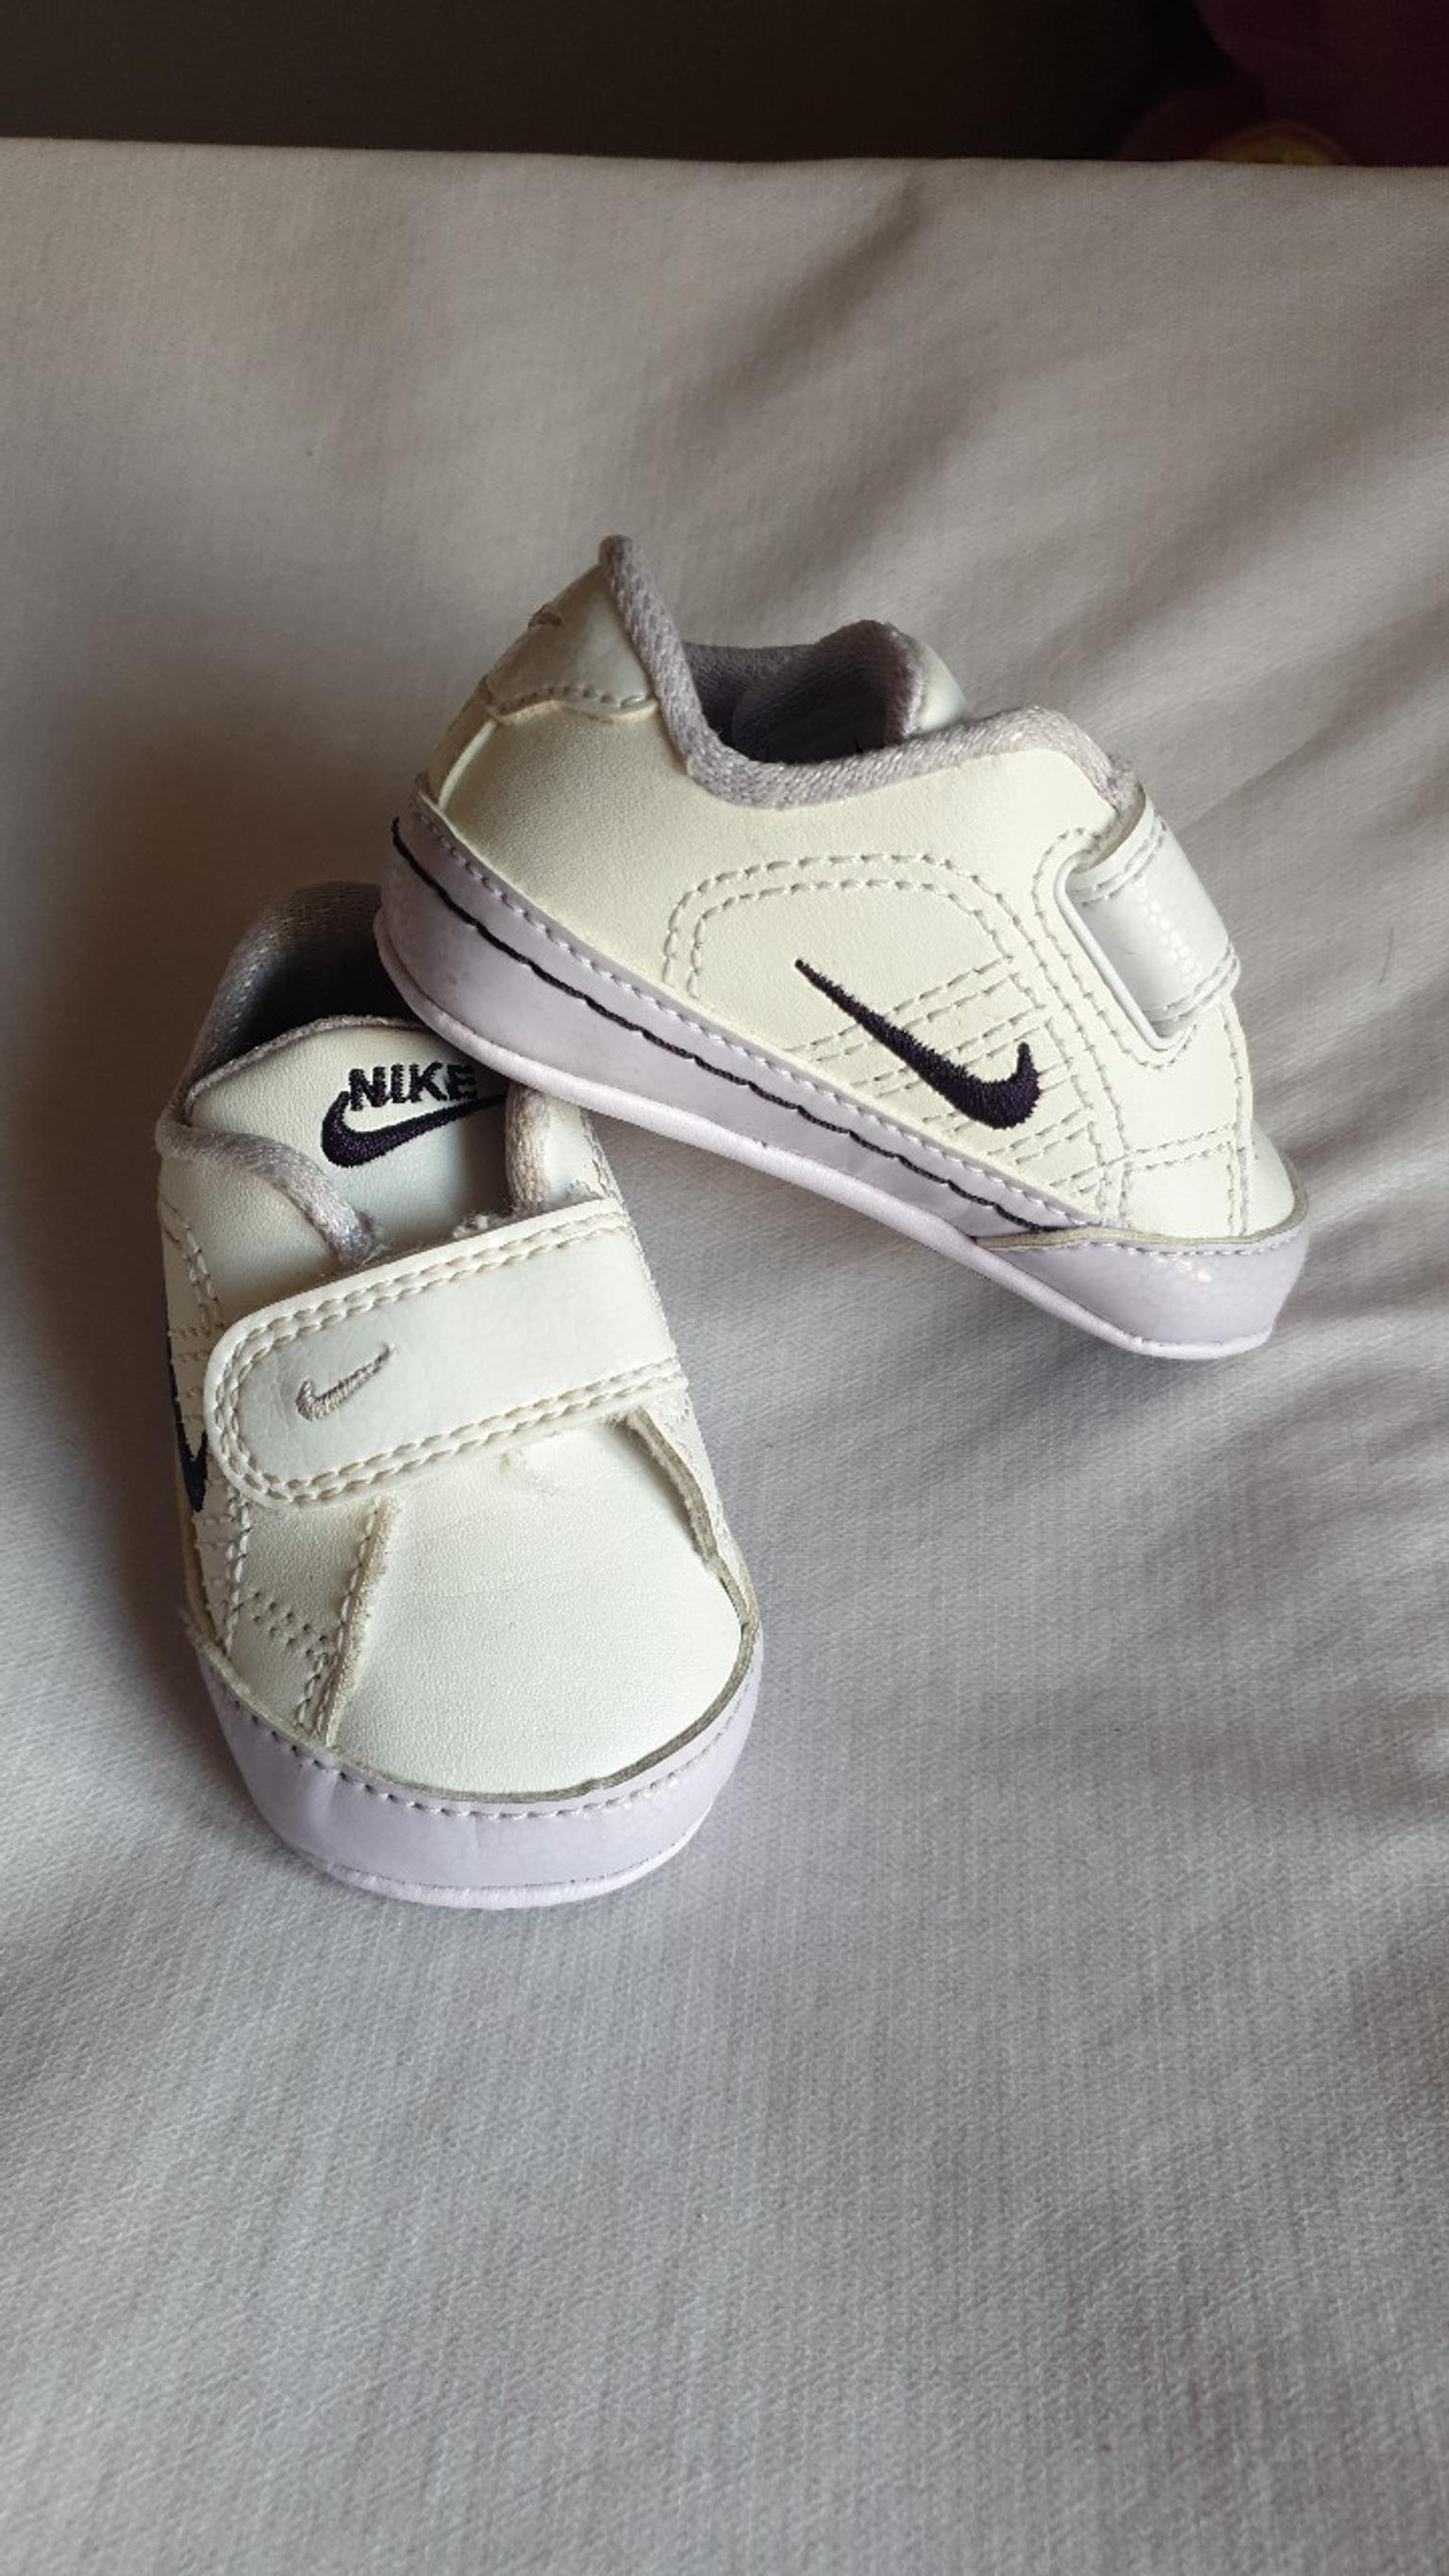 babys nike trainers